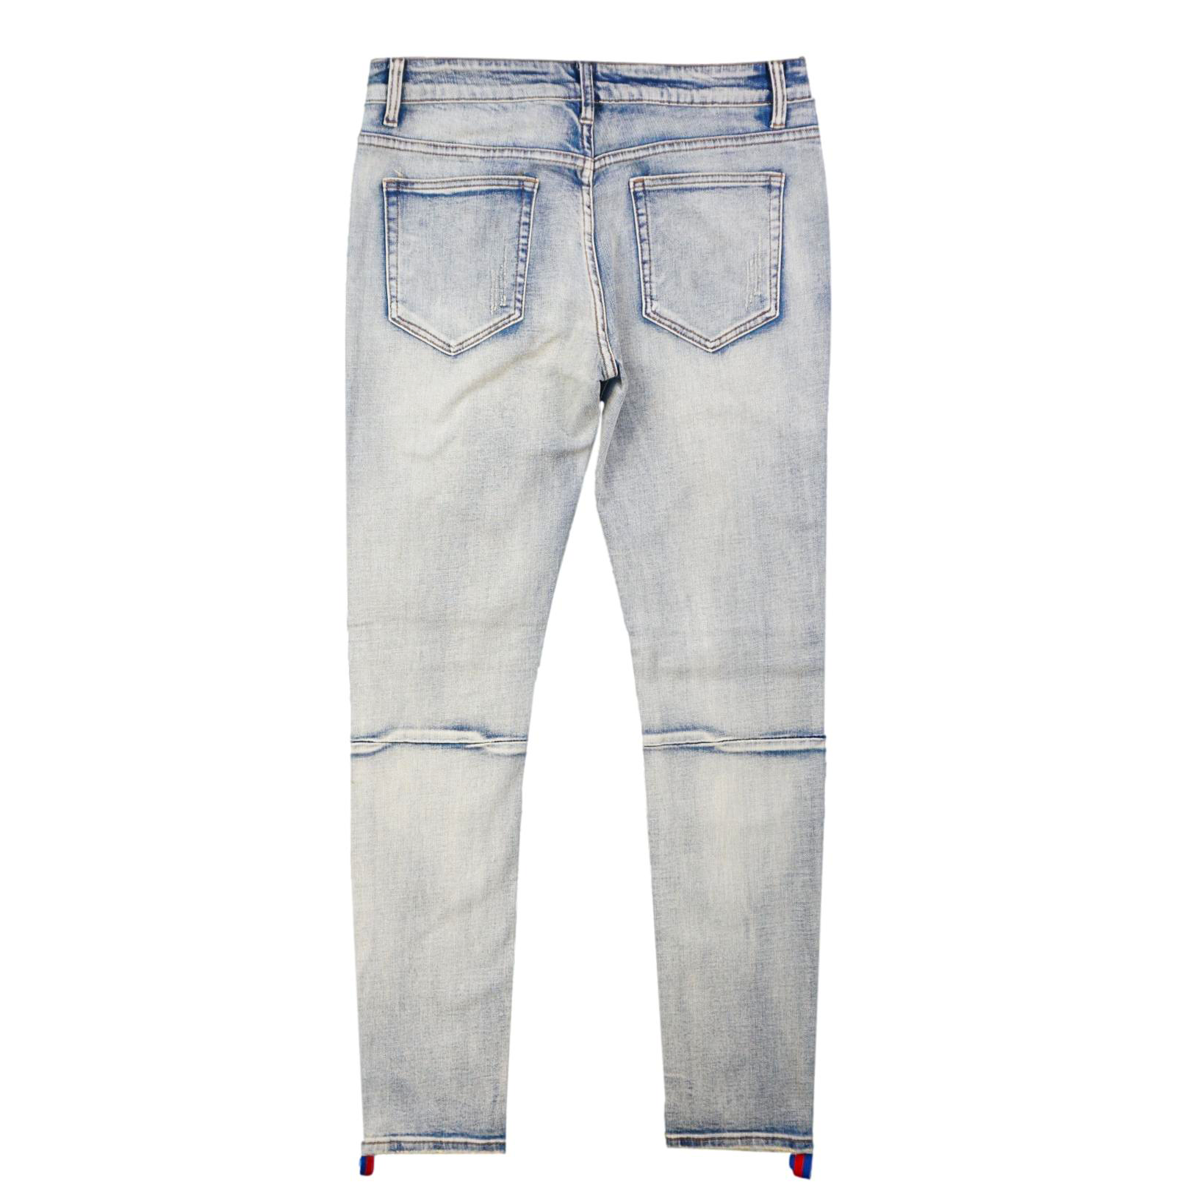 "Magma" Stripe Jeans (Pink/Baby Blue) /C2